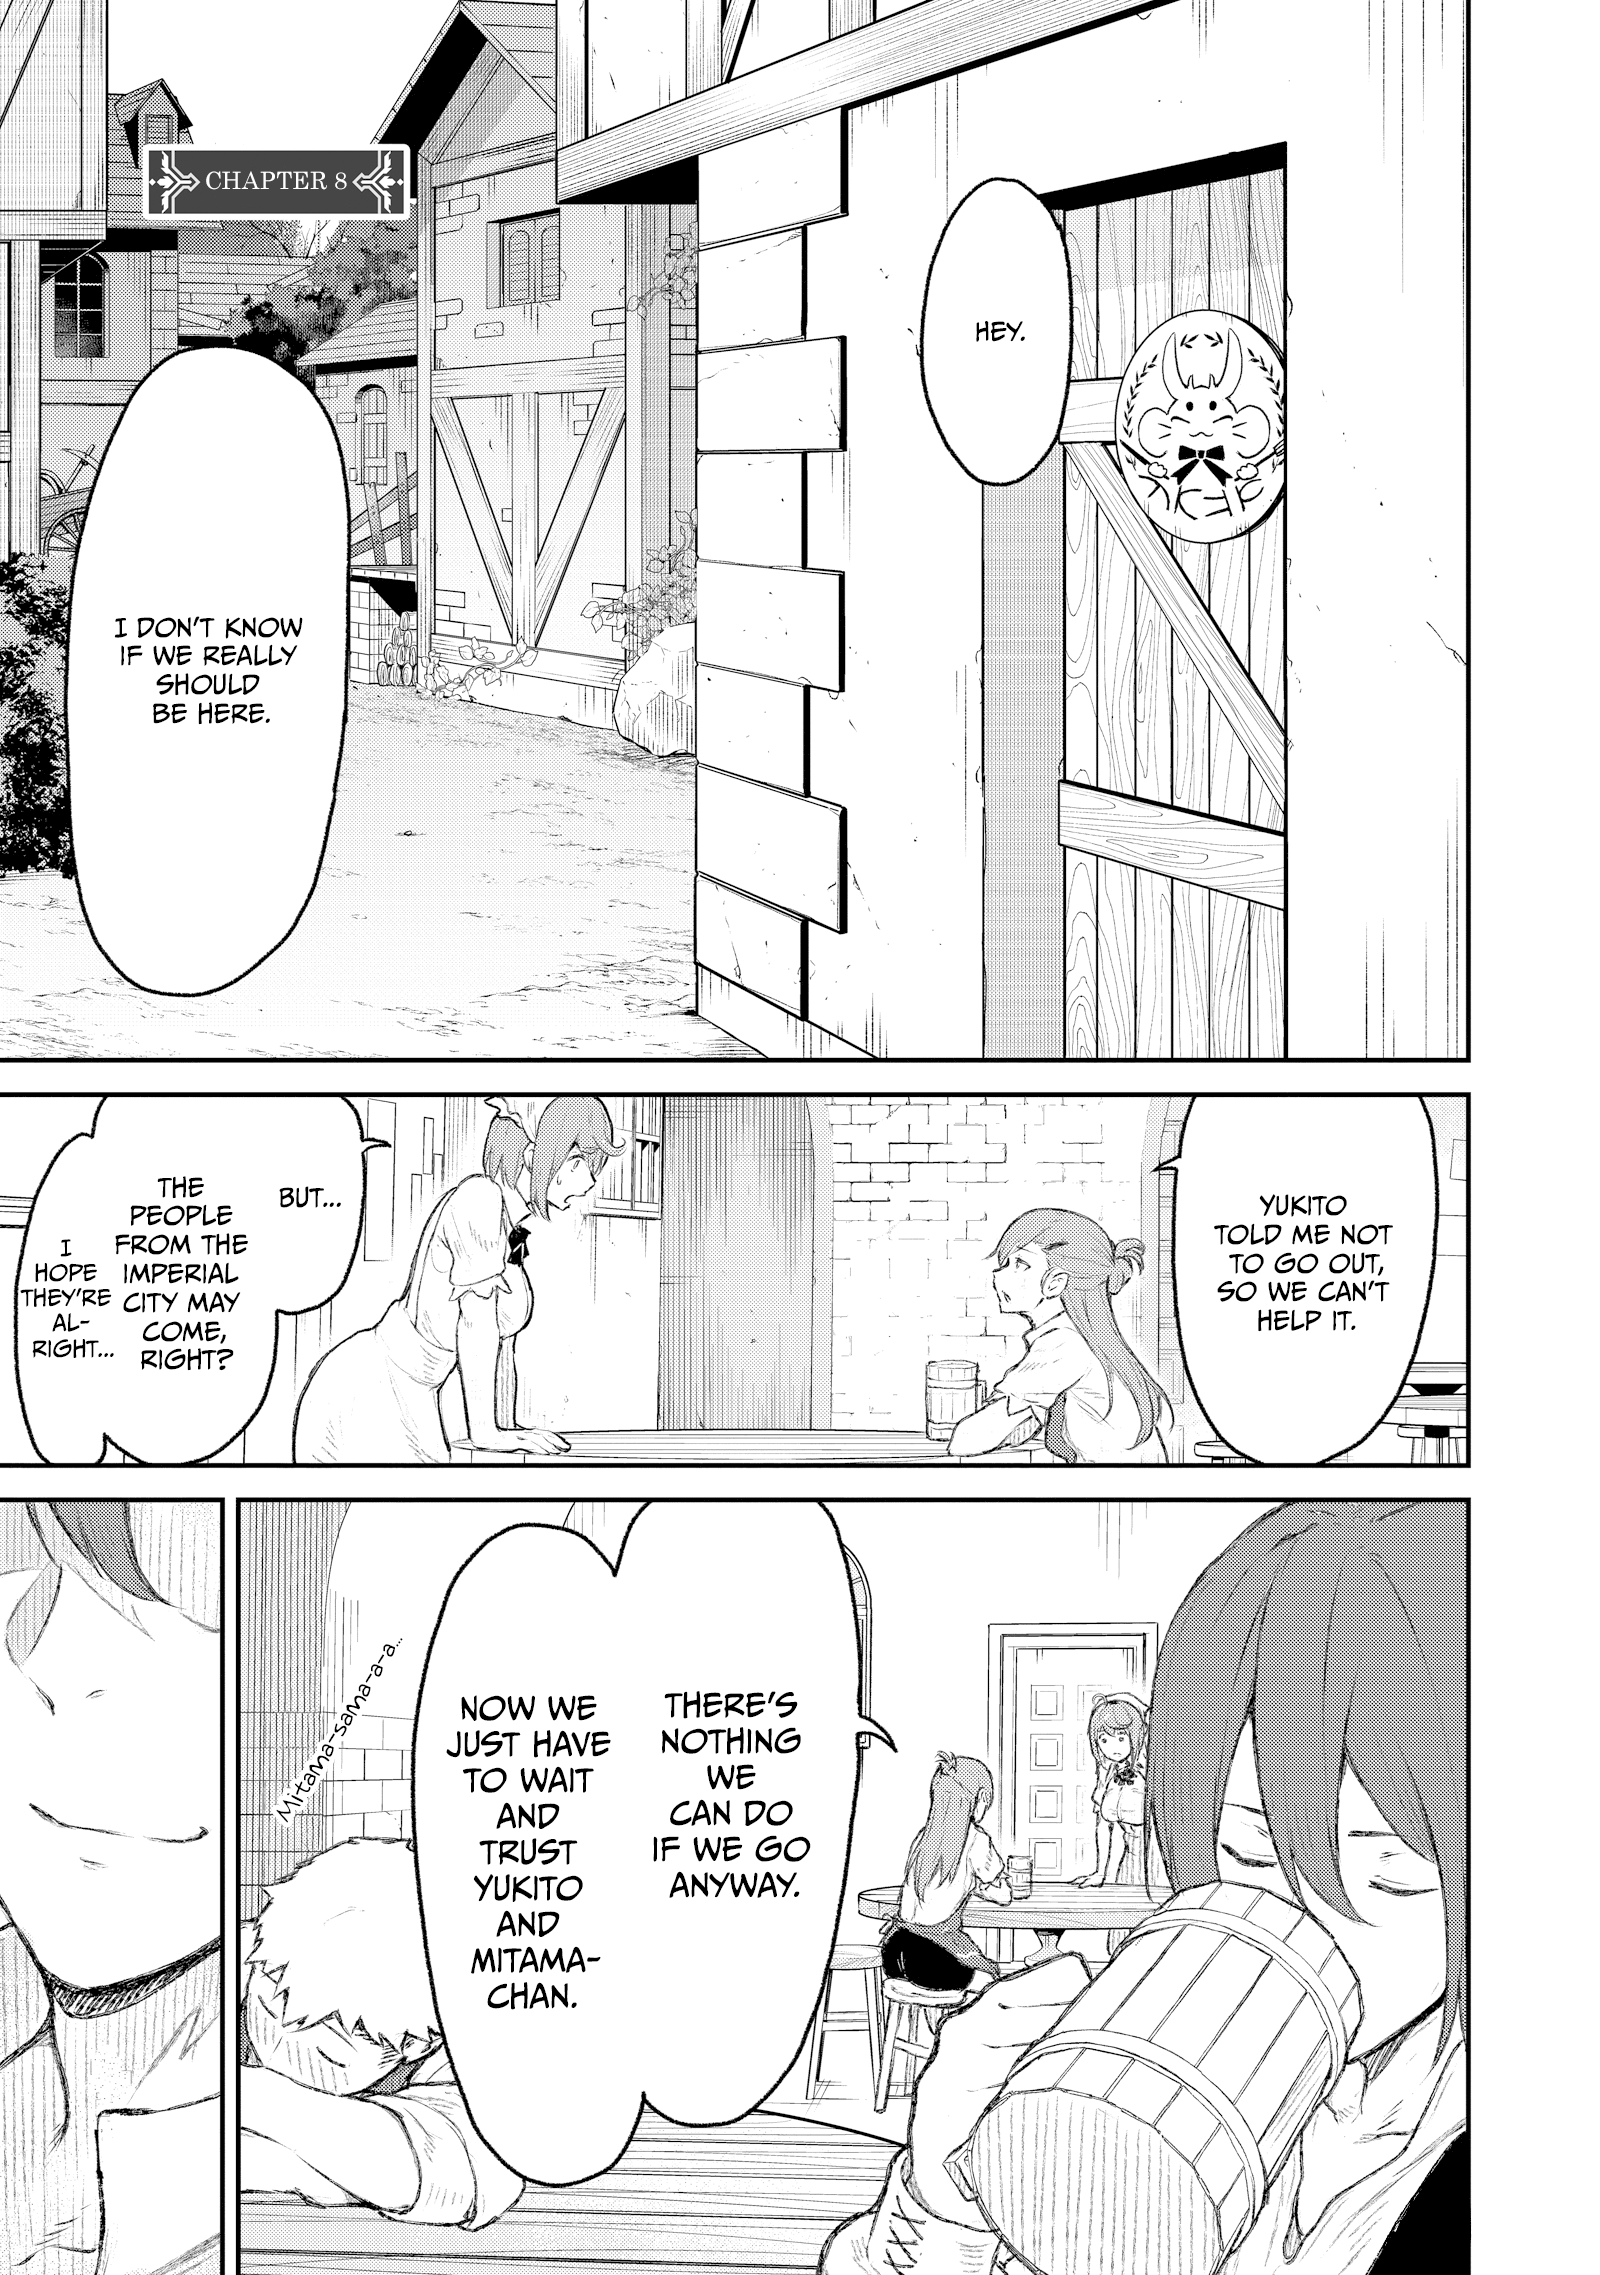 Kaminaki Sekai No Kamisama Katsudou Vol.2 Chapter 8: Story About Death Even In Another World - Picture 1